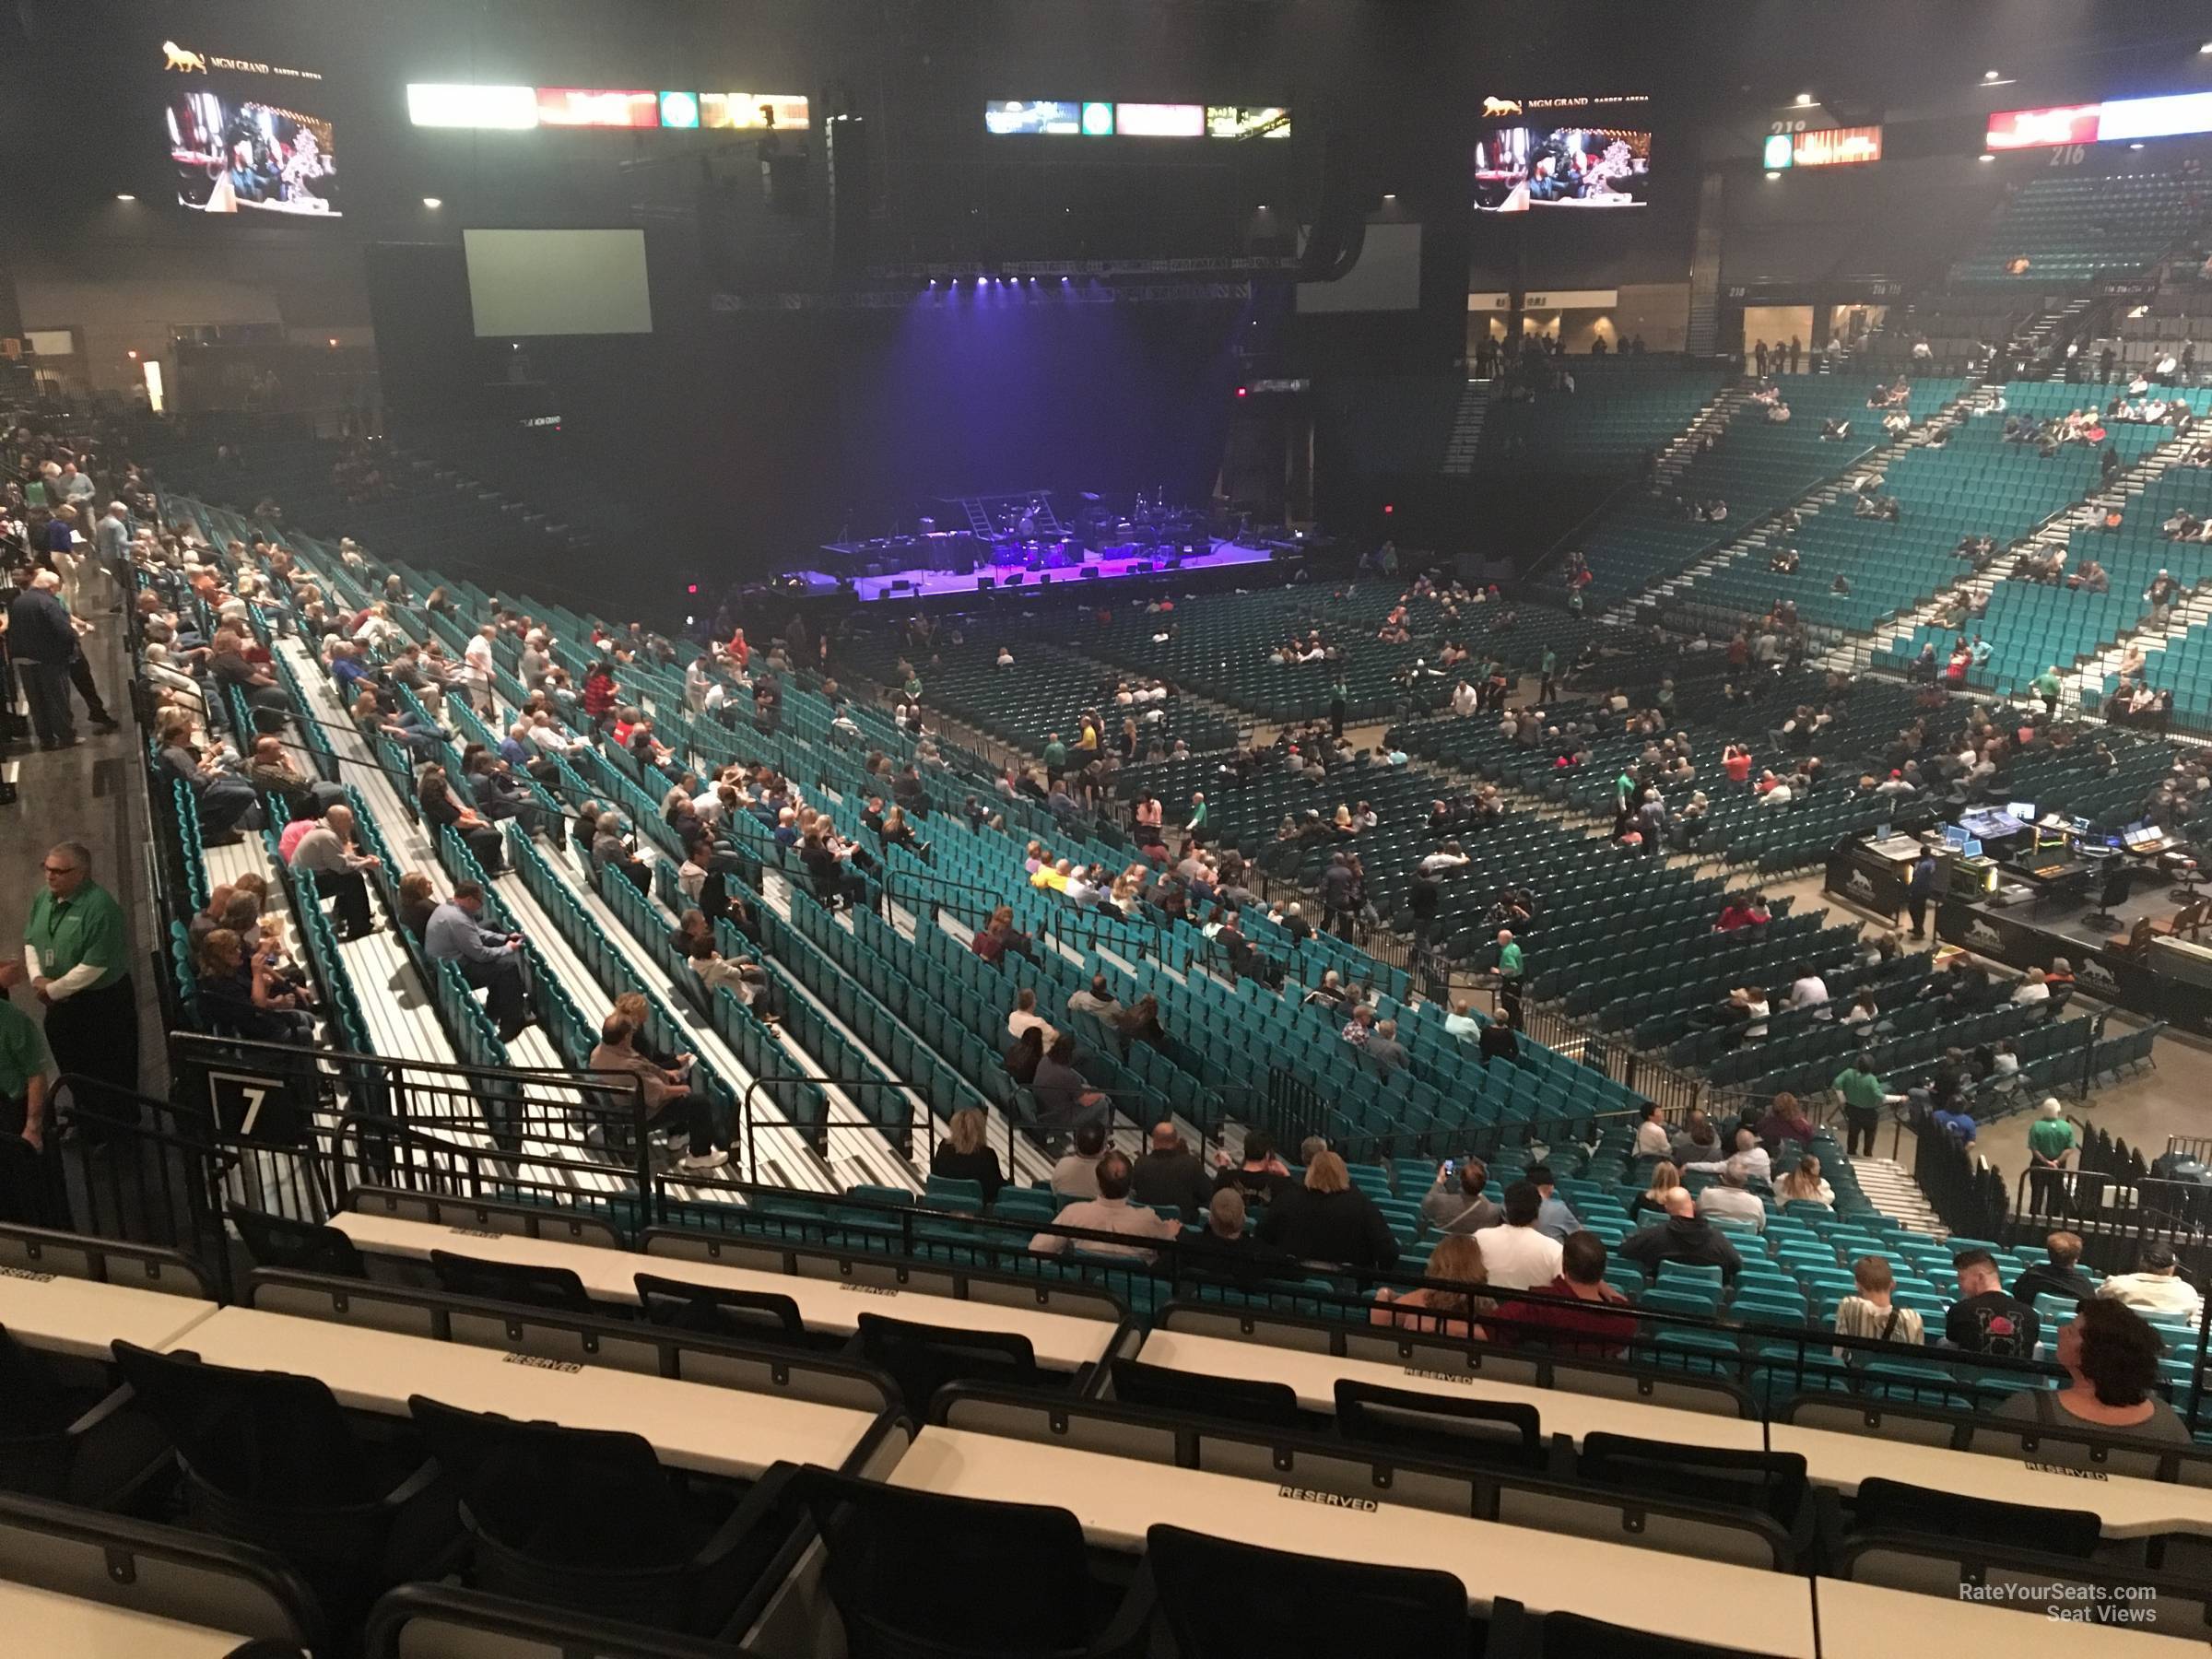 Mgm Grand Garden Arena Section 107 Rateyourseats Com